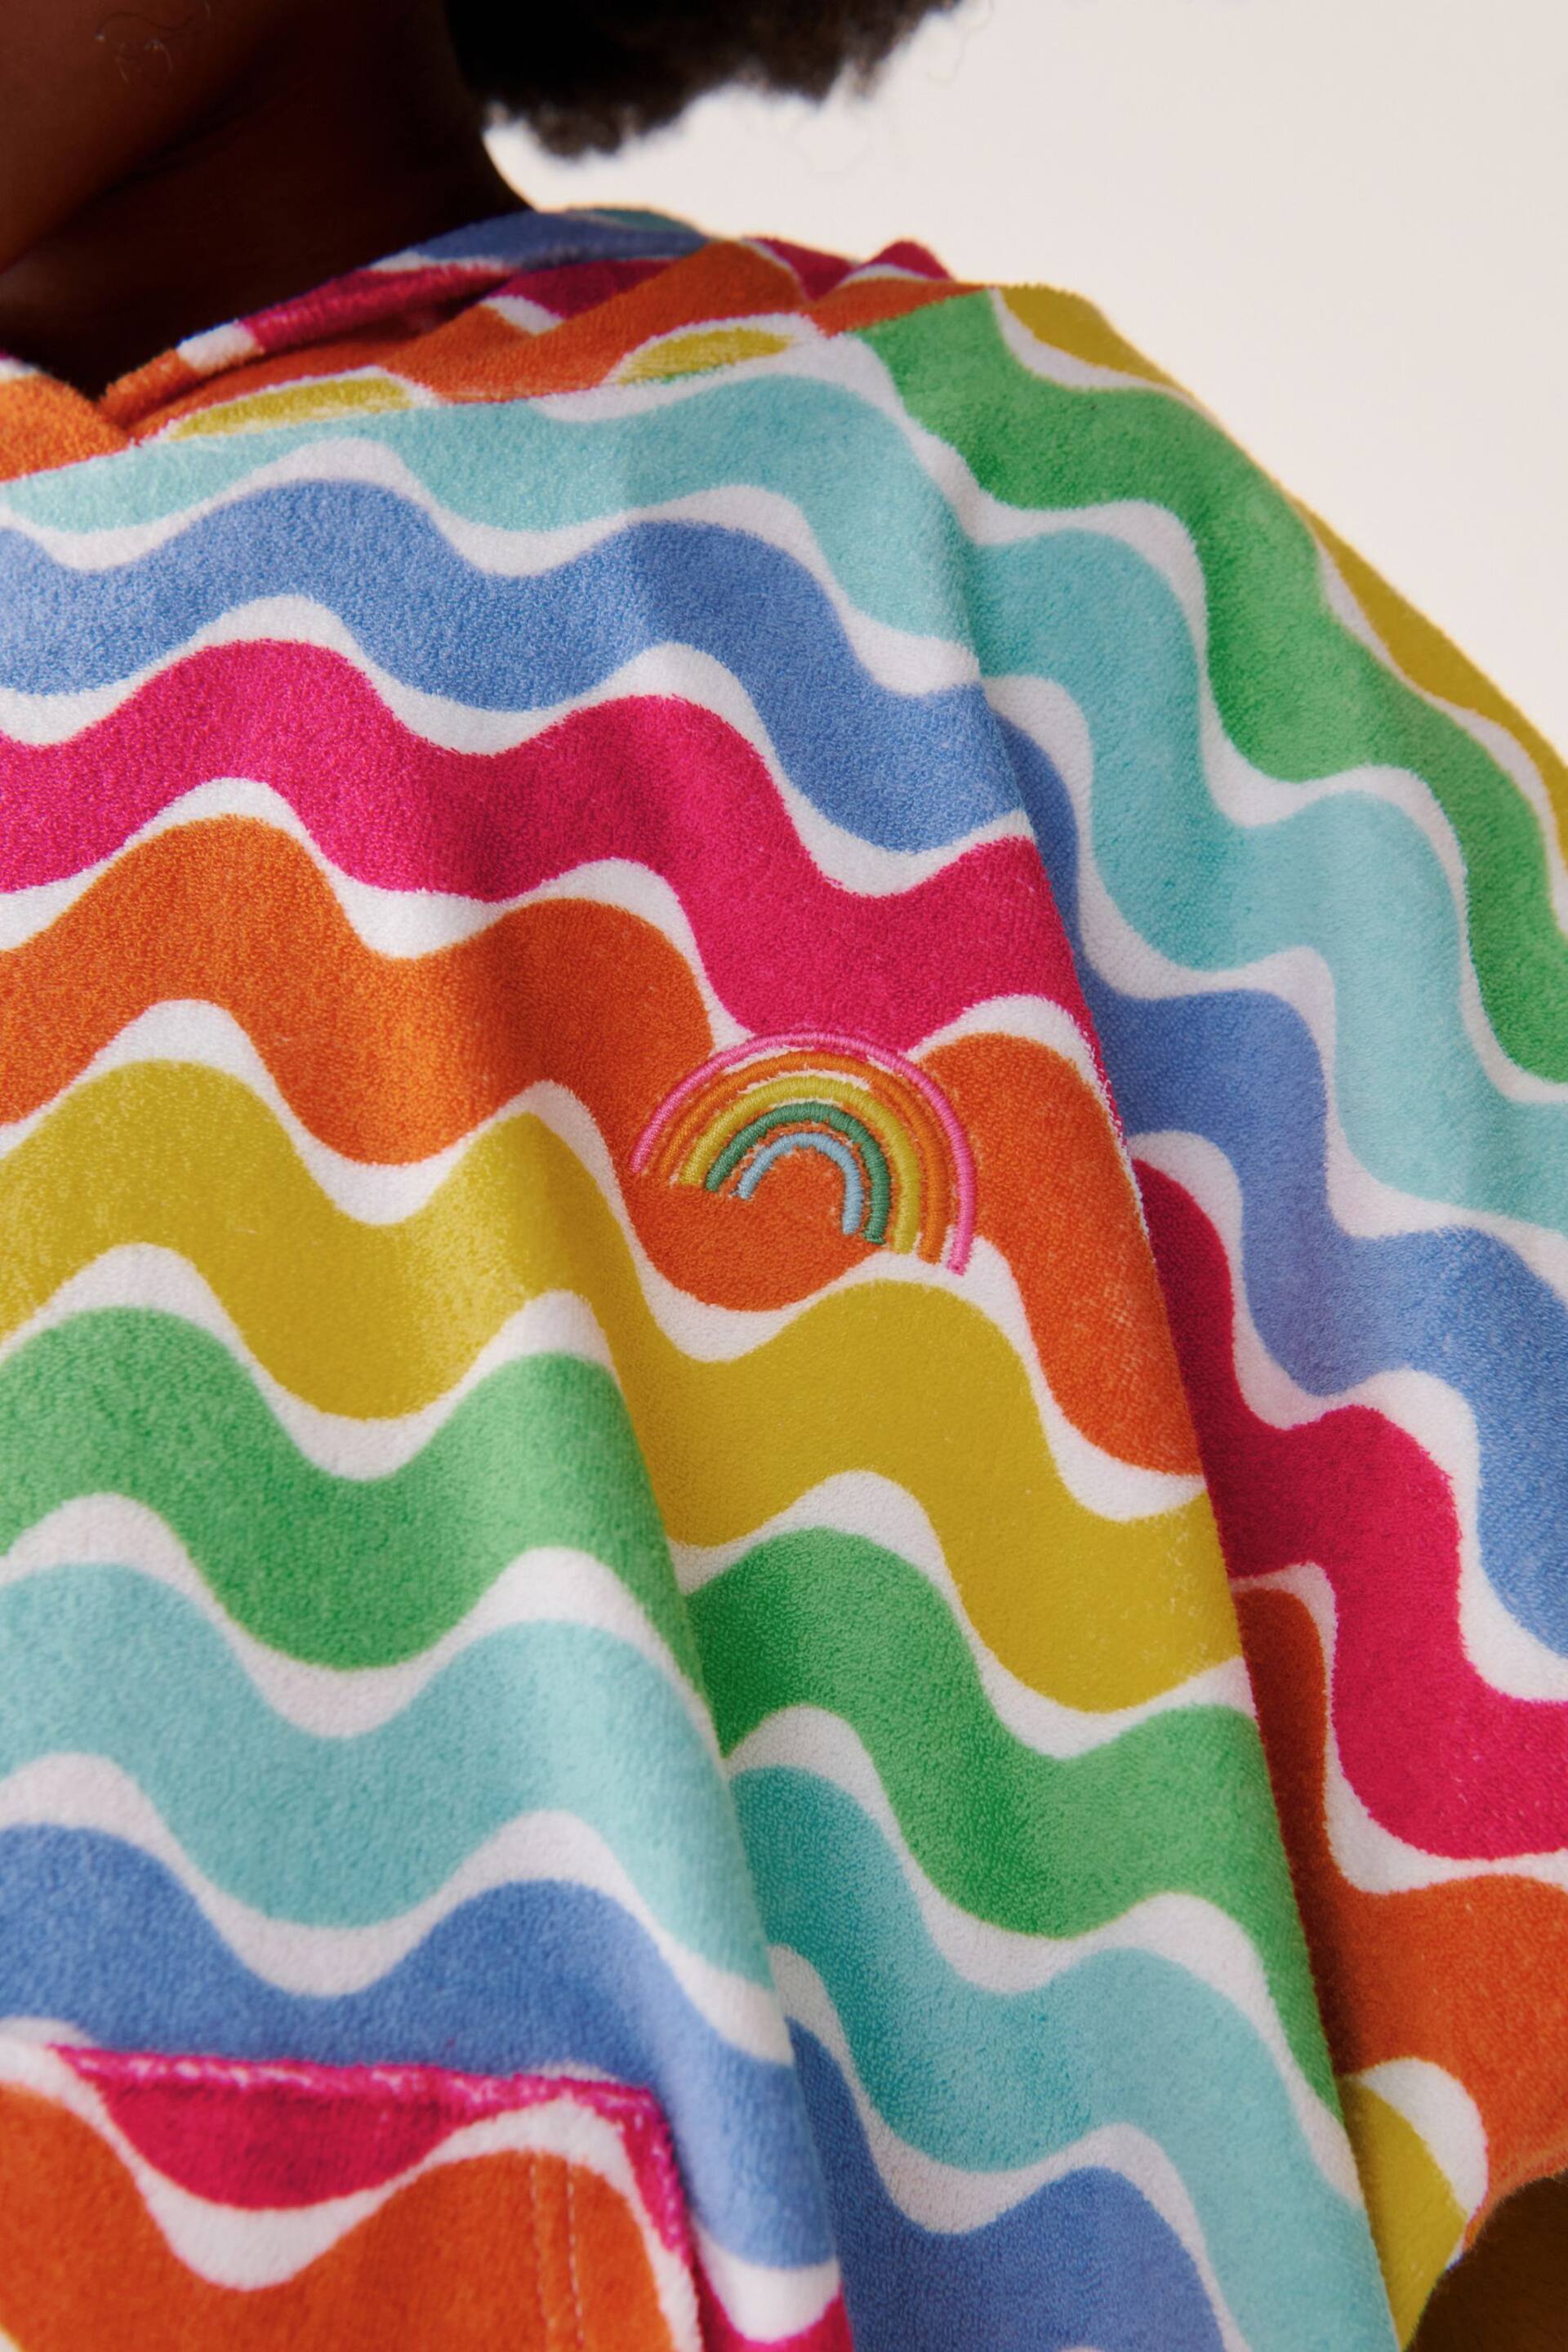 Little Bird by Jools Oliver Multi Pastel Rainbow Hooded Towelling Beach Poncho - Image 4 of 7